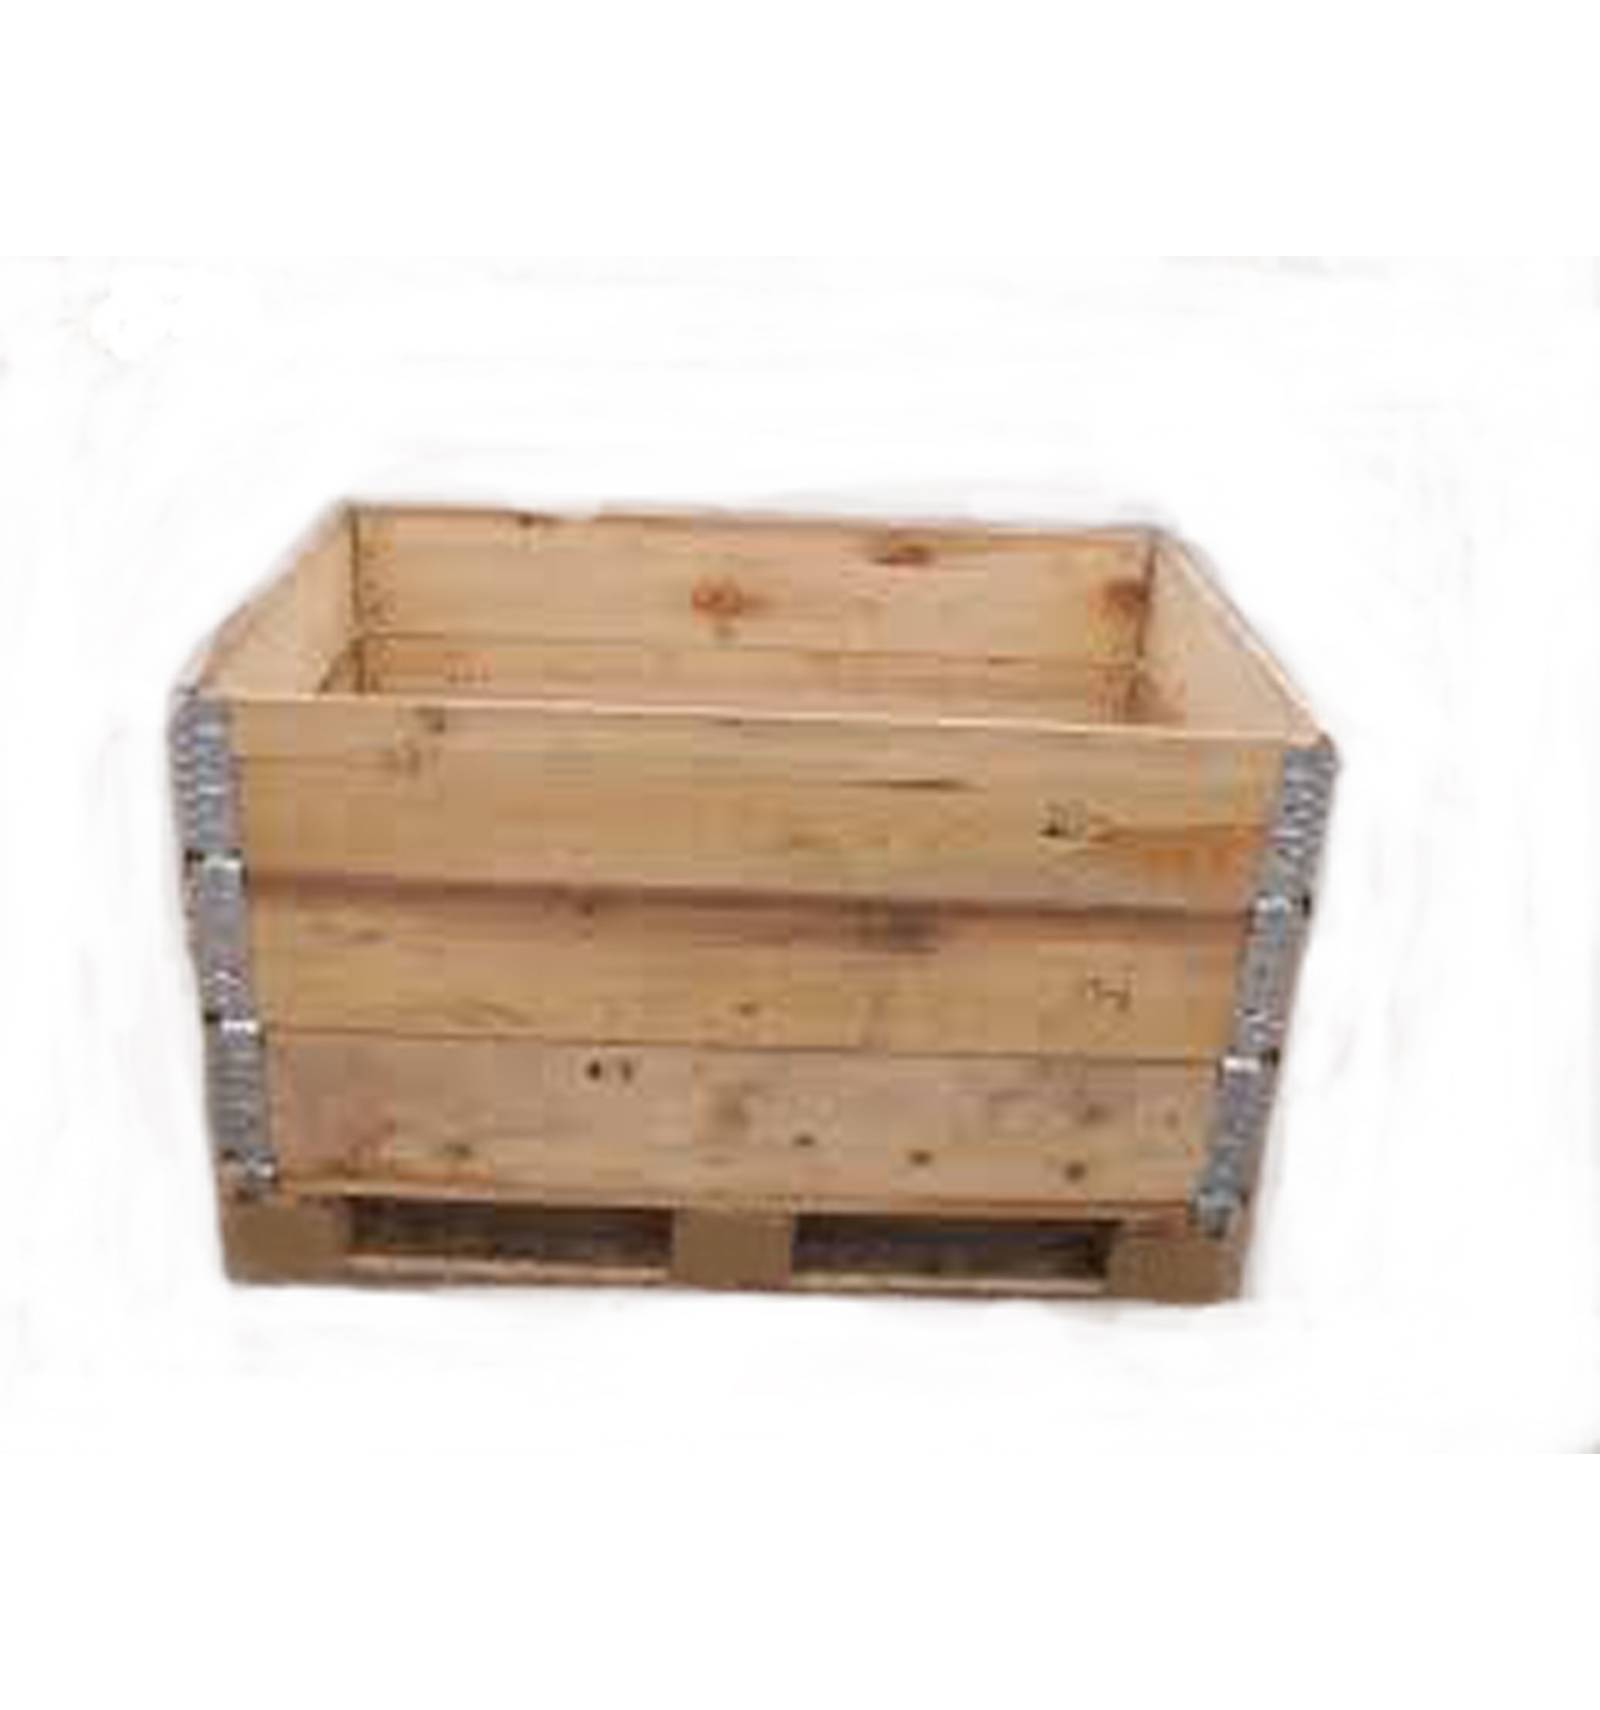 Euro Pallet Collars size 1200 mm x 800 mm used ideal for bedding New Condition 